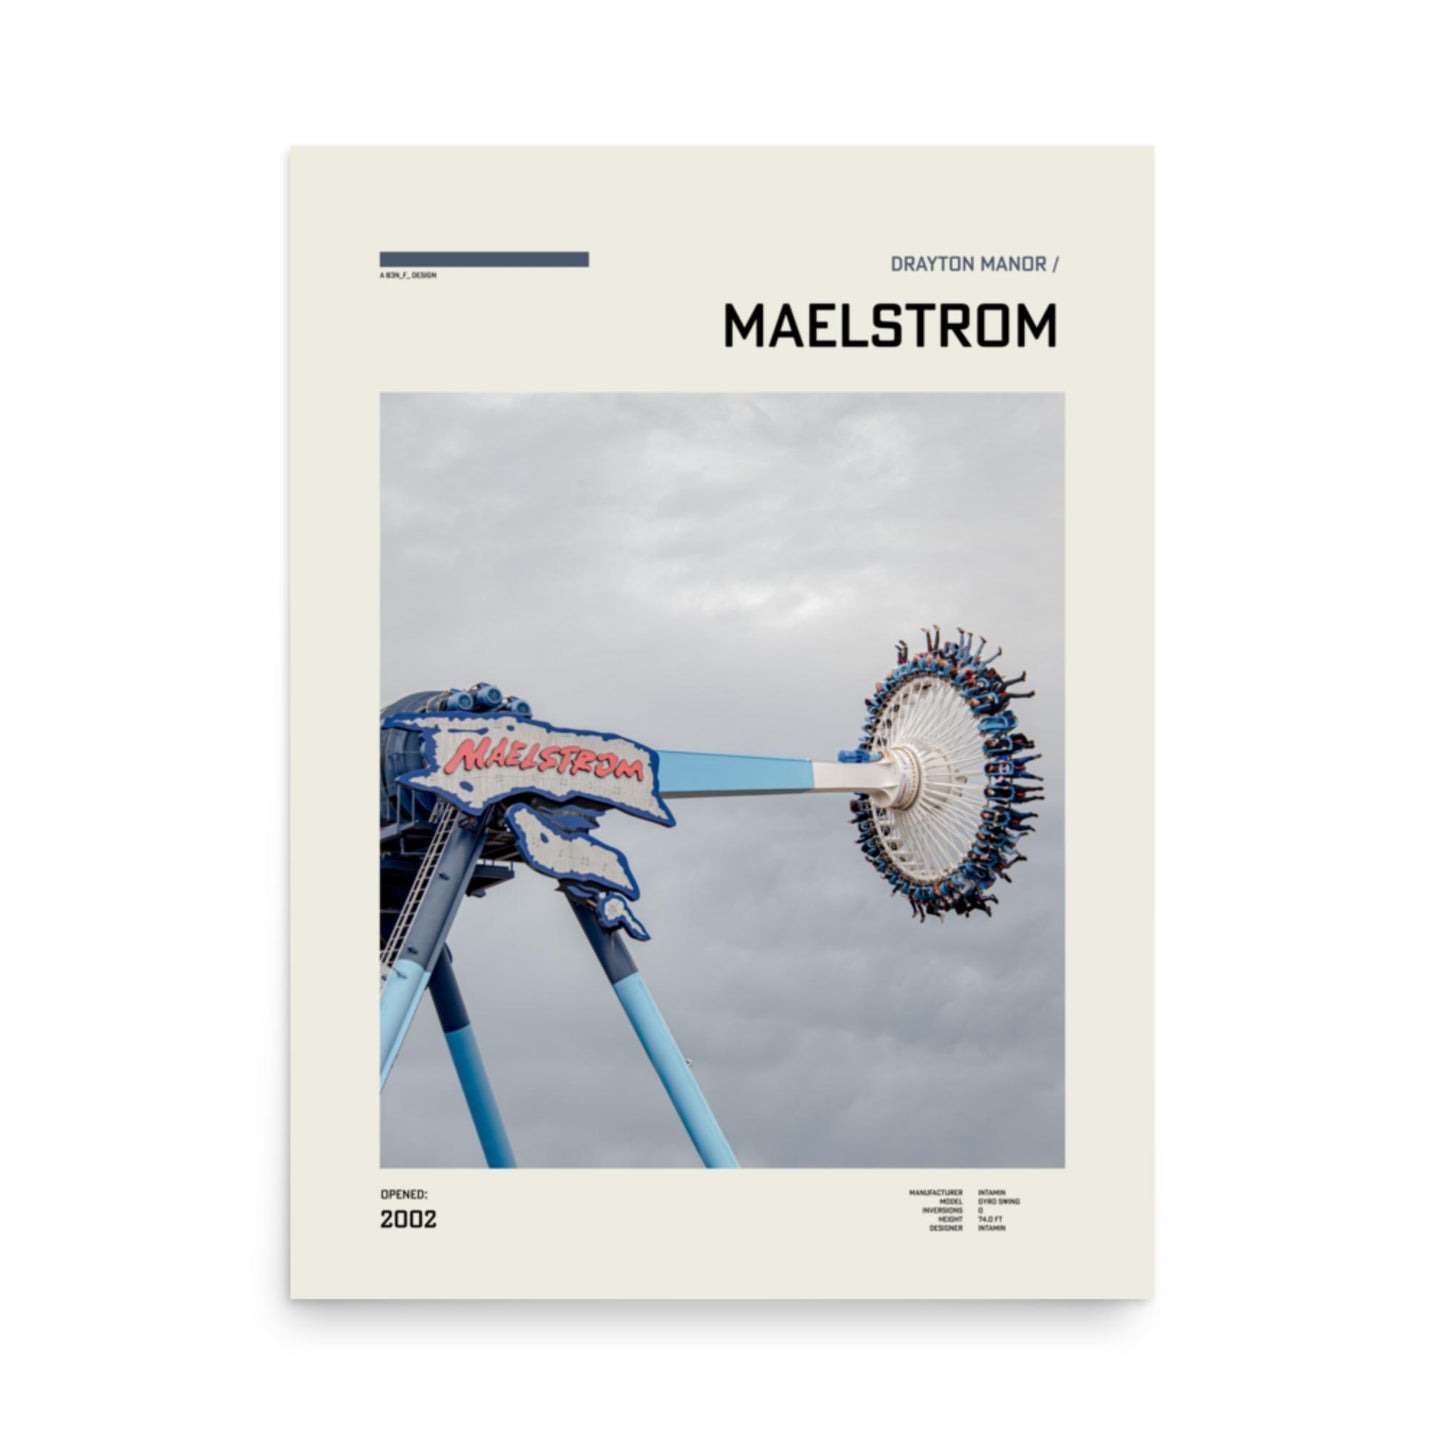 Swinging to New Heights: Maelstrom